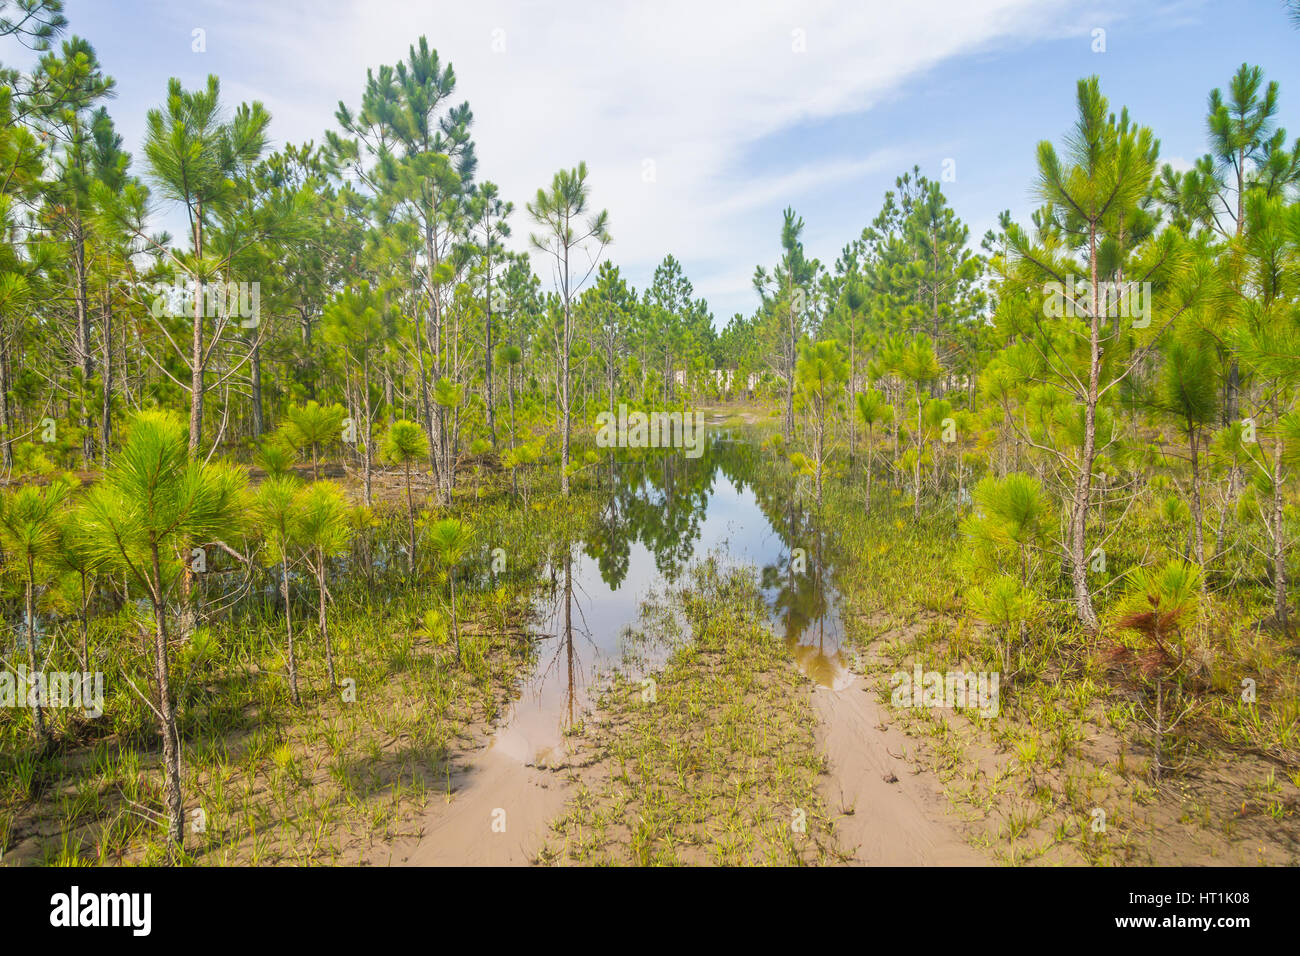 Forest of Pinus Elliottii with reflection in puddle at Lagoa dos Patos lake Stock Photo